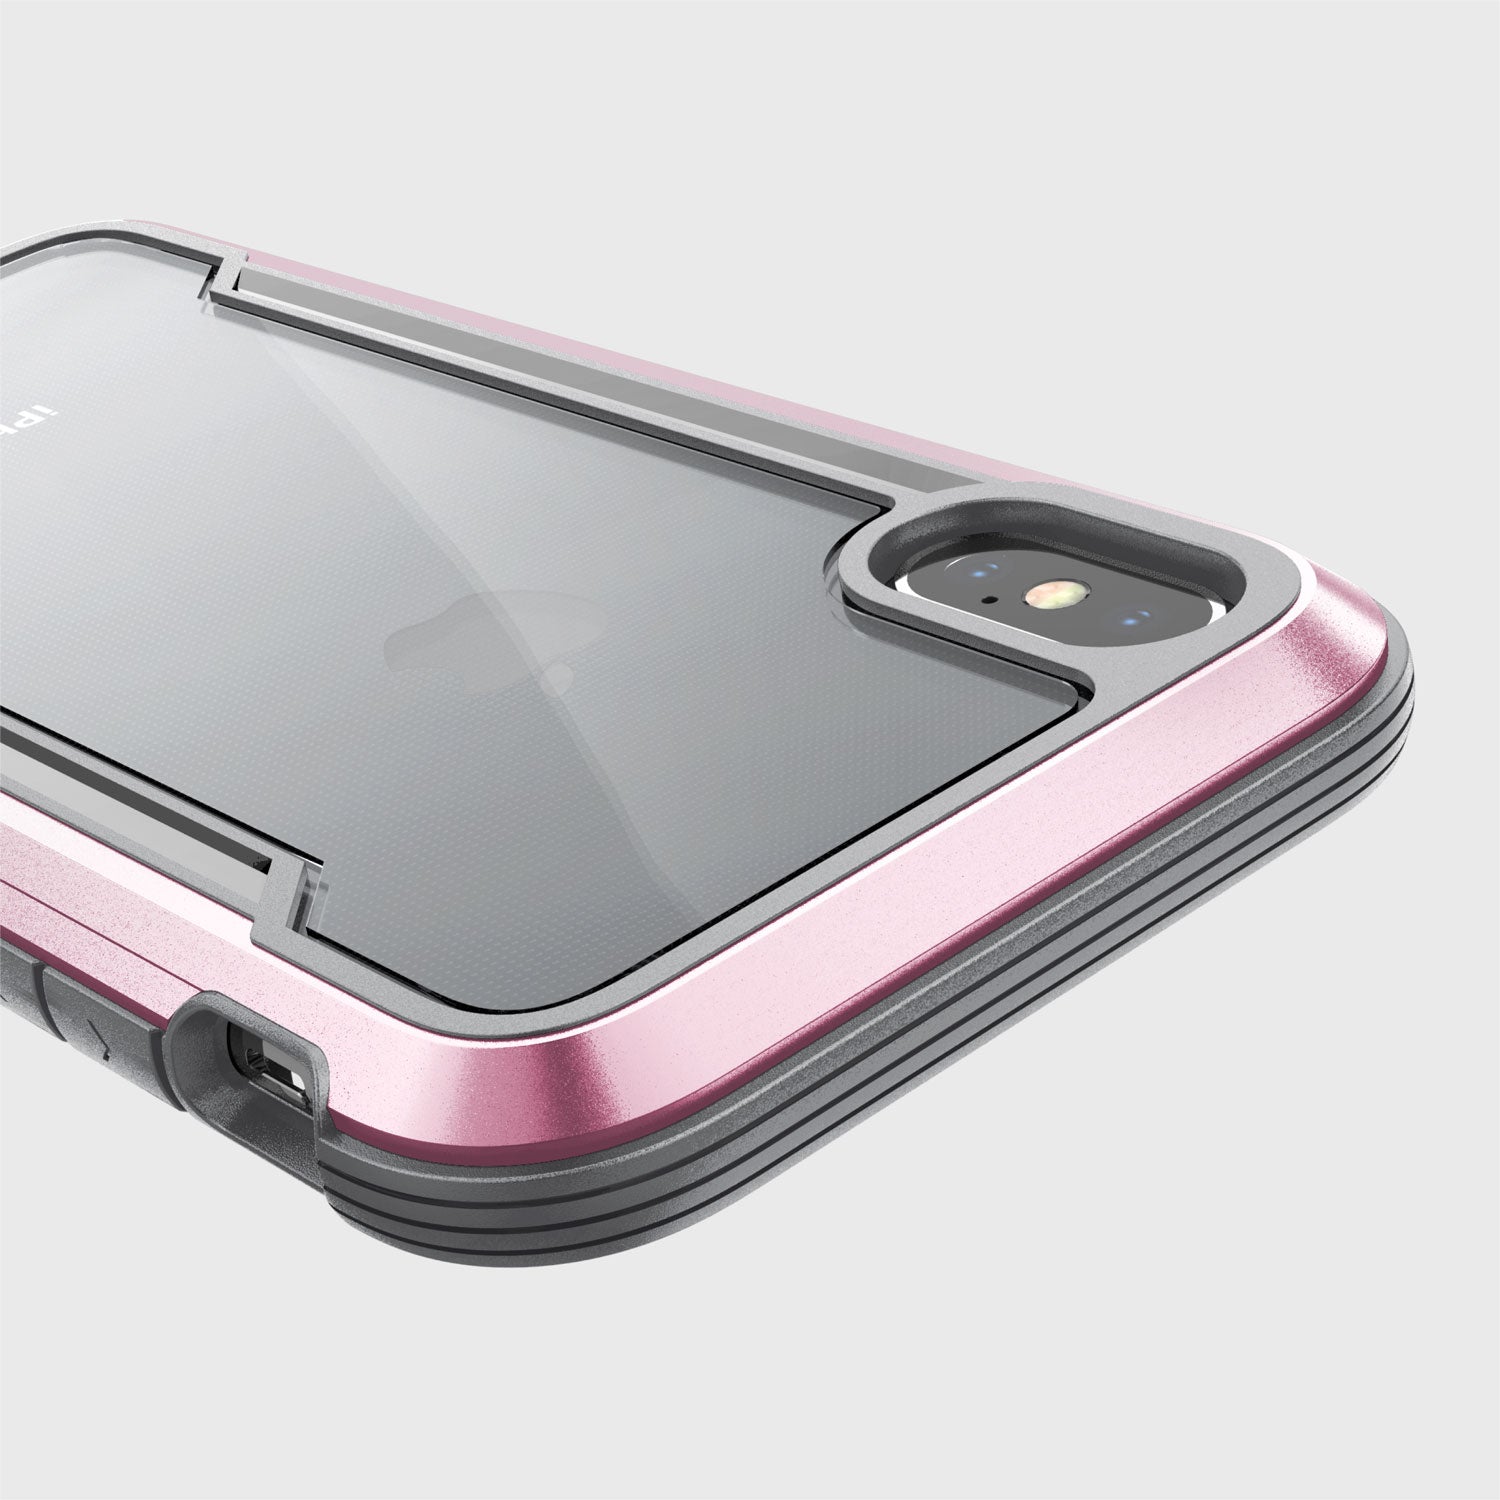 The back view of a pink Raptic Shield case for iPhone XS Max Case - SHIELD, offering drop protection.